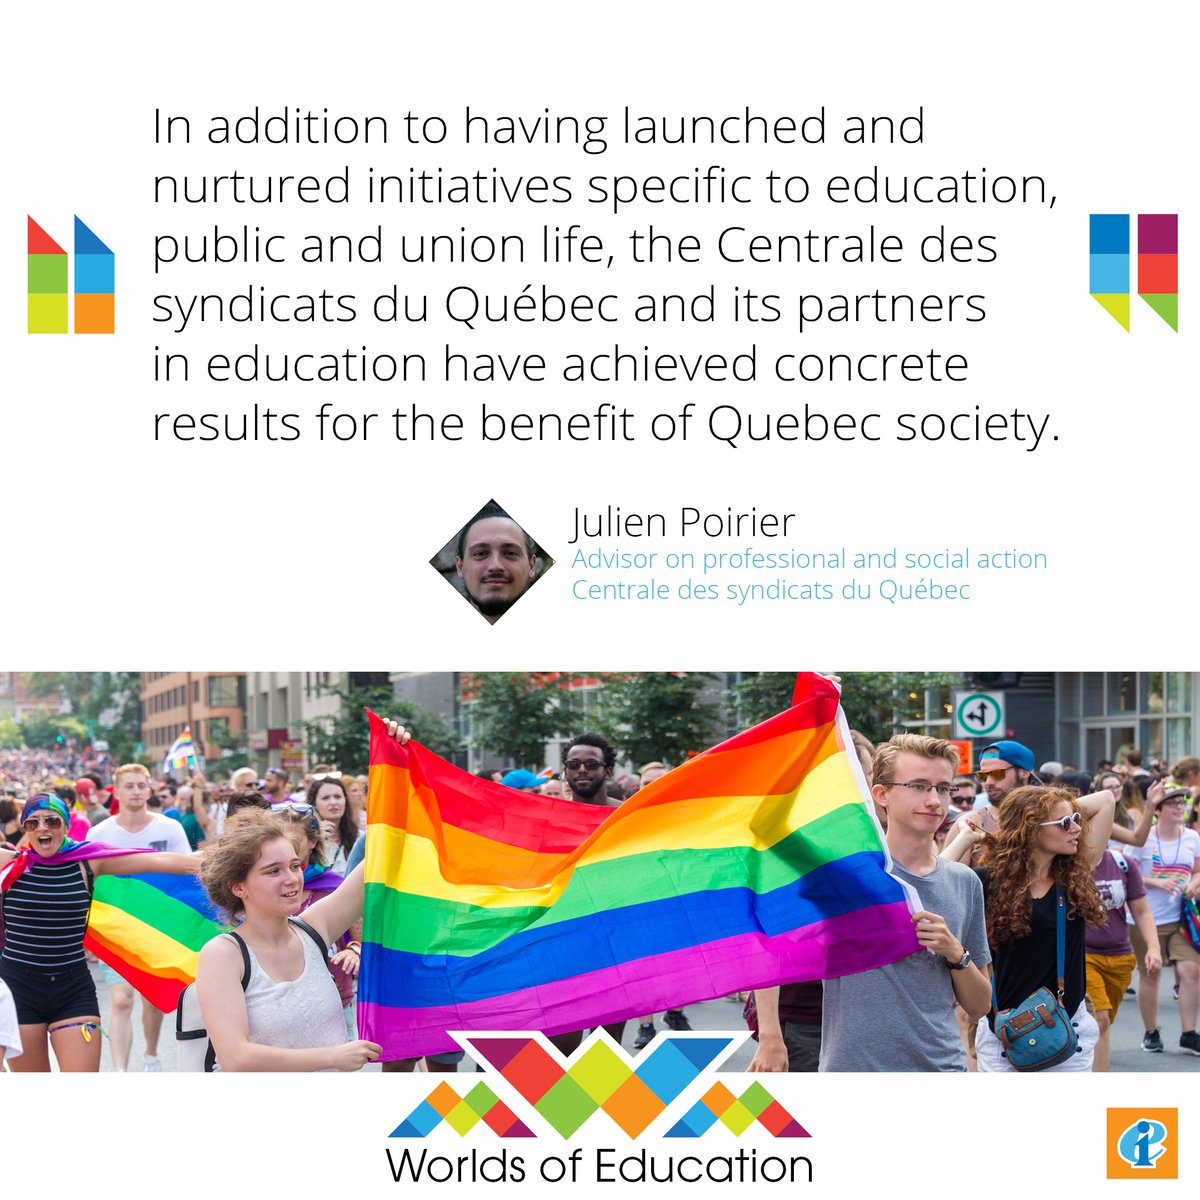 The trade union movement in education has a long and proud history of fighting for the rights of LGBTI+ people. Julien Poirier shares the story of @CSQ_Centrale and its efforts to build inclusive schools and communities in Québec. ➡️ eiie.io/4arbeVF #IDAHOBIT